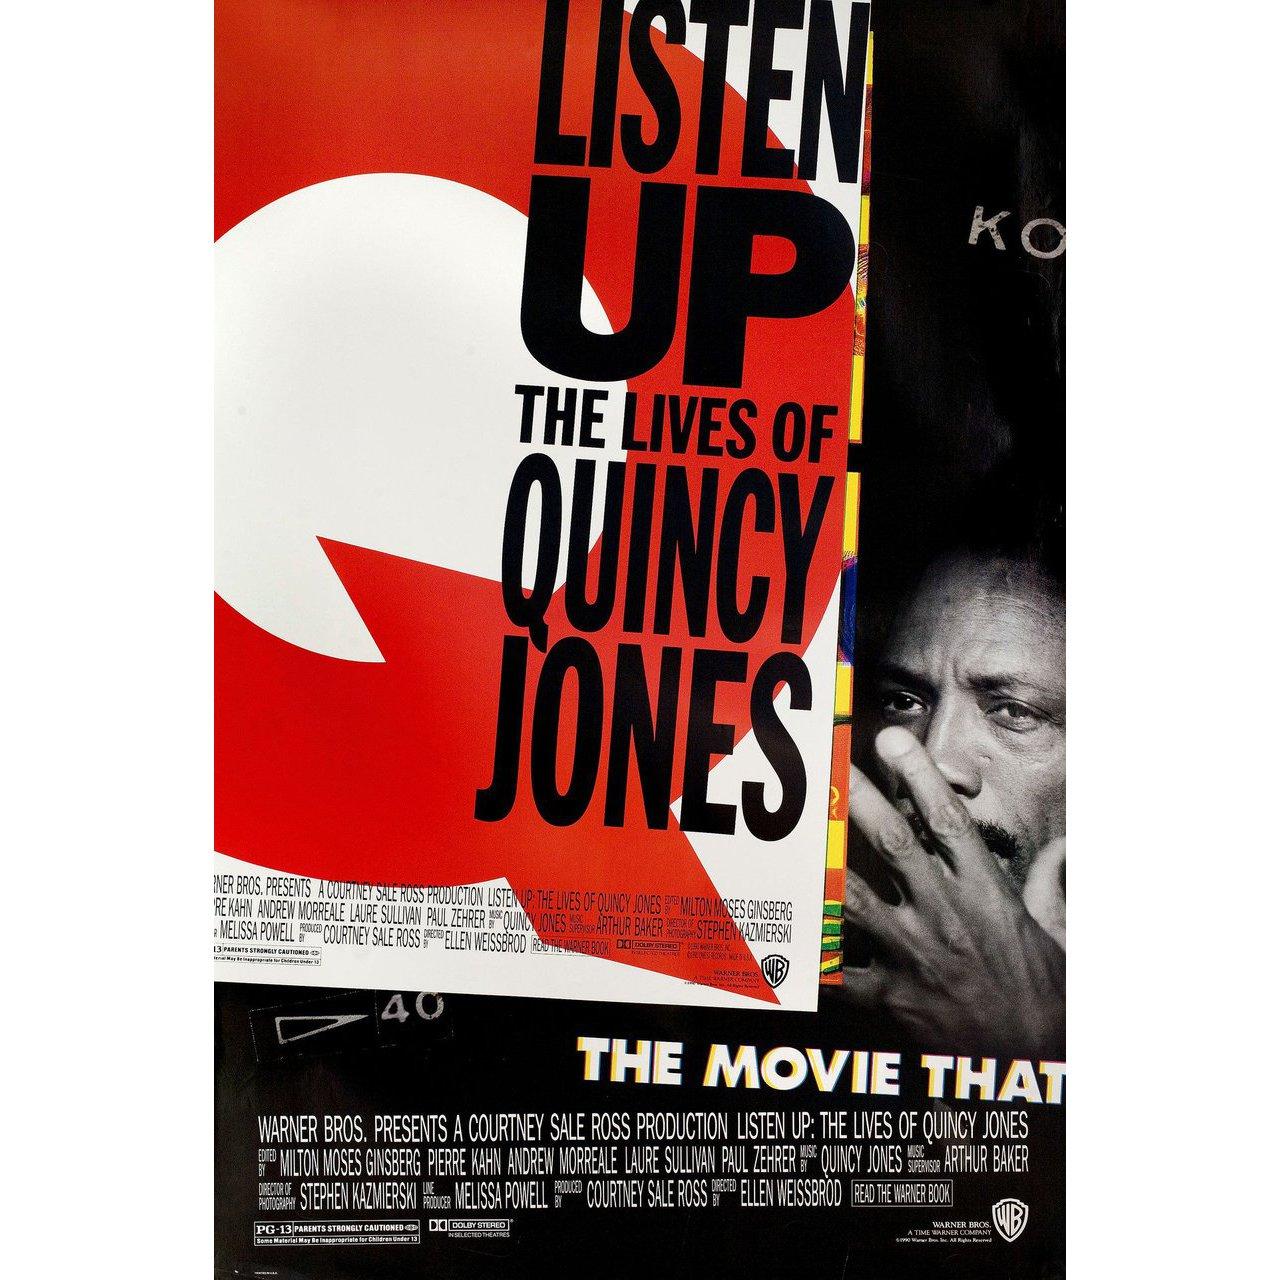 Original 1990 U.S. one sheet poster for the documentary film Listen Up: The Lives of Quincy Jones directed by Ellen Weissbrod with Clarence Avant / George Benson / Richard Brooks / Tevin Campbell. Very good-fine condition, rolled. Please note: the